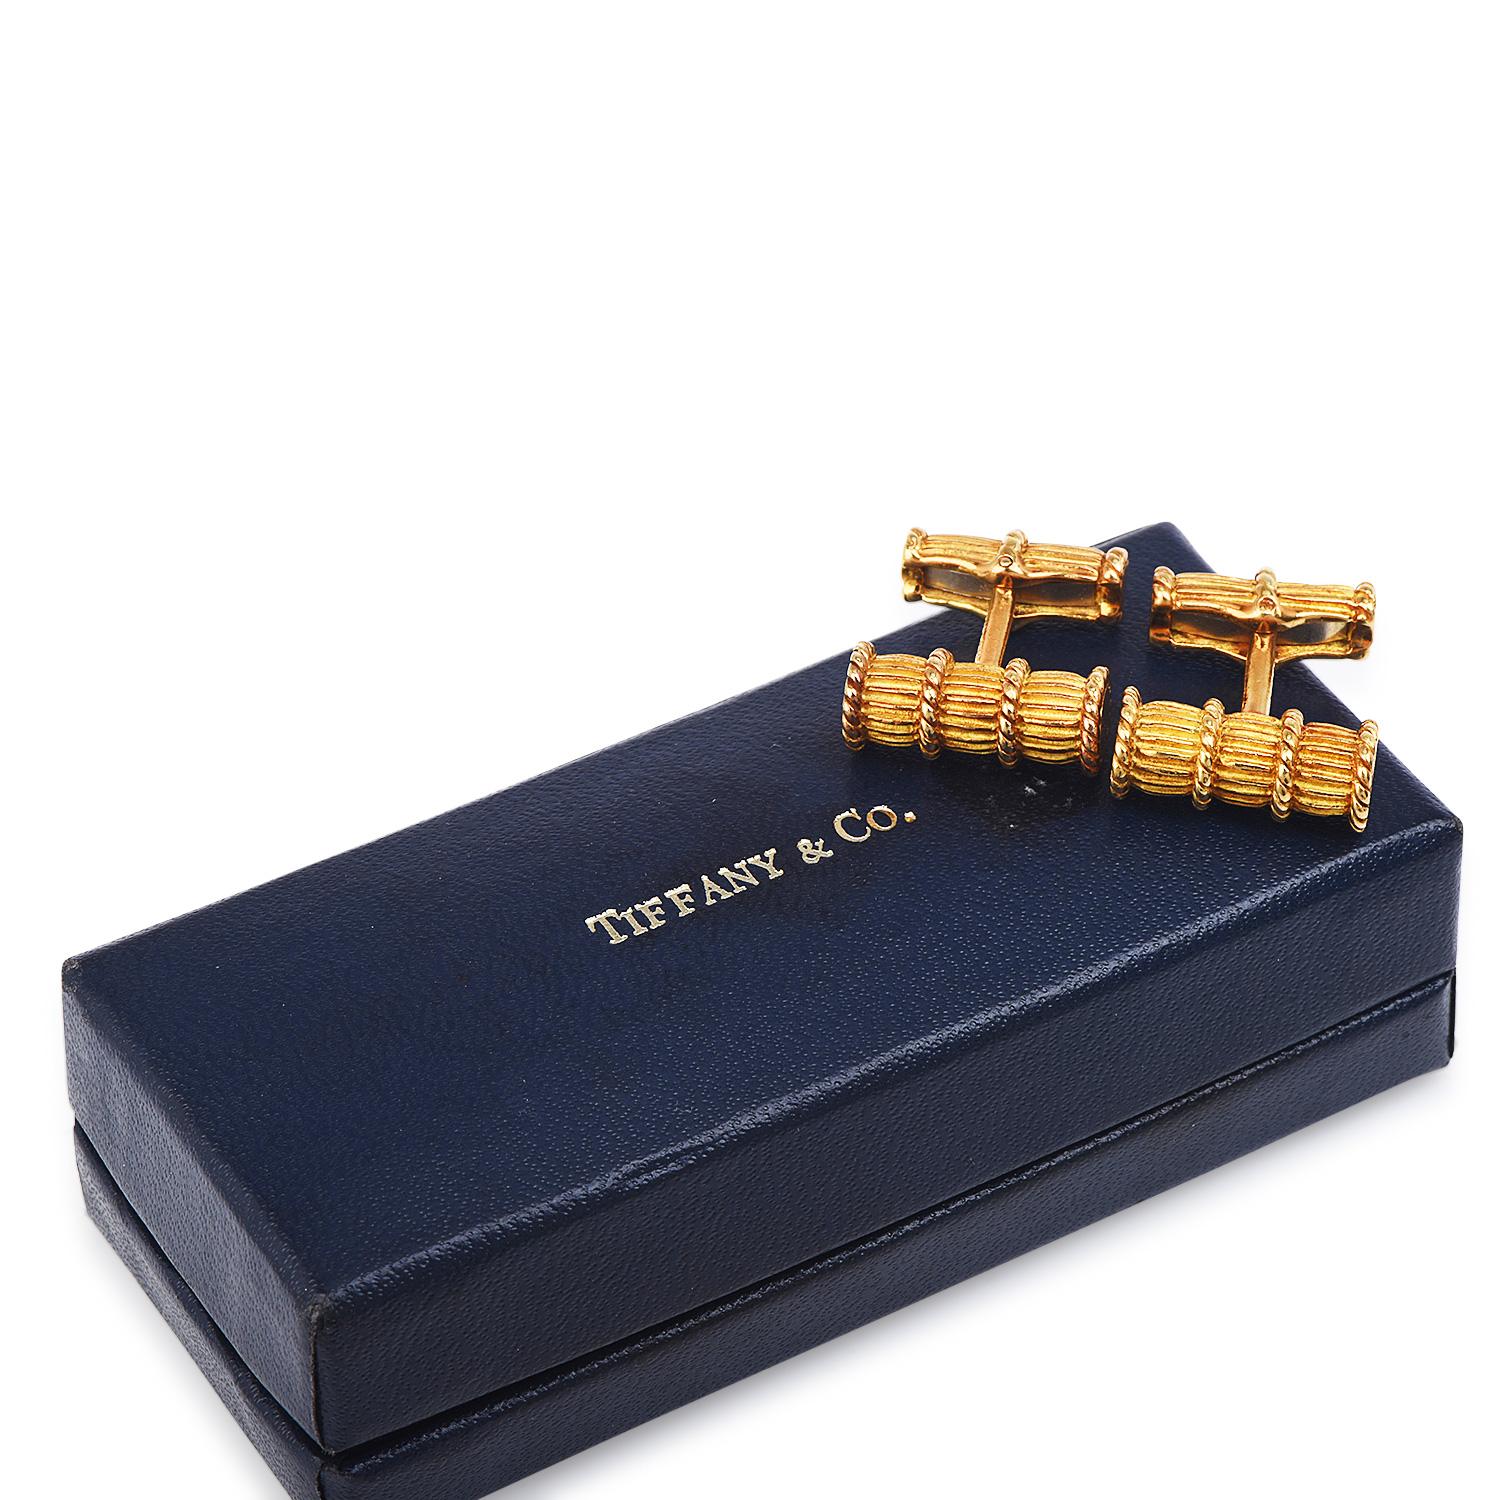 Stand out with these  pair of handsome Vintage 1970's large cylindrical shapes with Rope Texture cufflinks weighing approximately 31.1grams 

Handcrafted in solid heavy 18K yellow gold, inspired by the distinctive cable style of jewelry, 

The